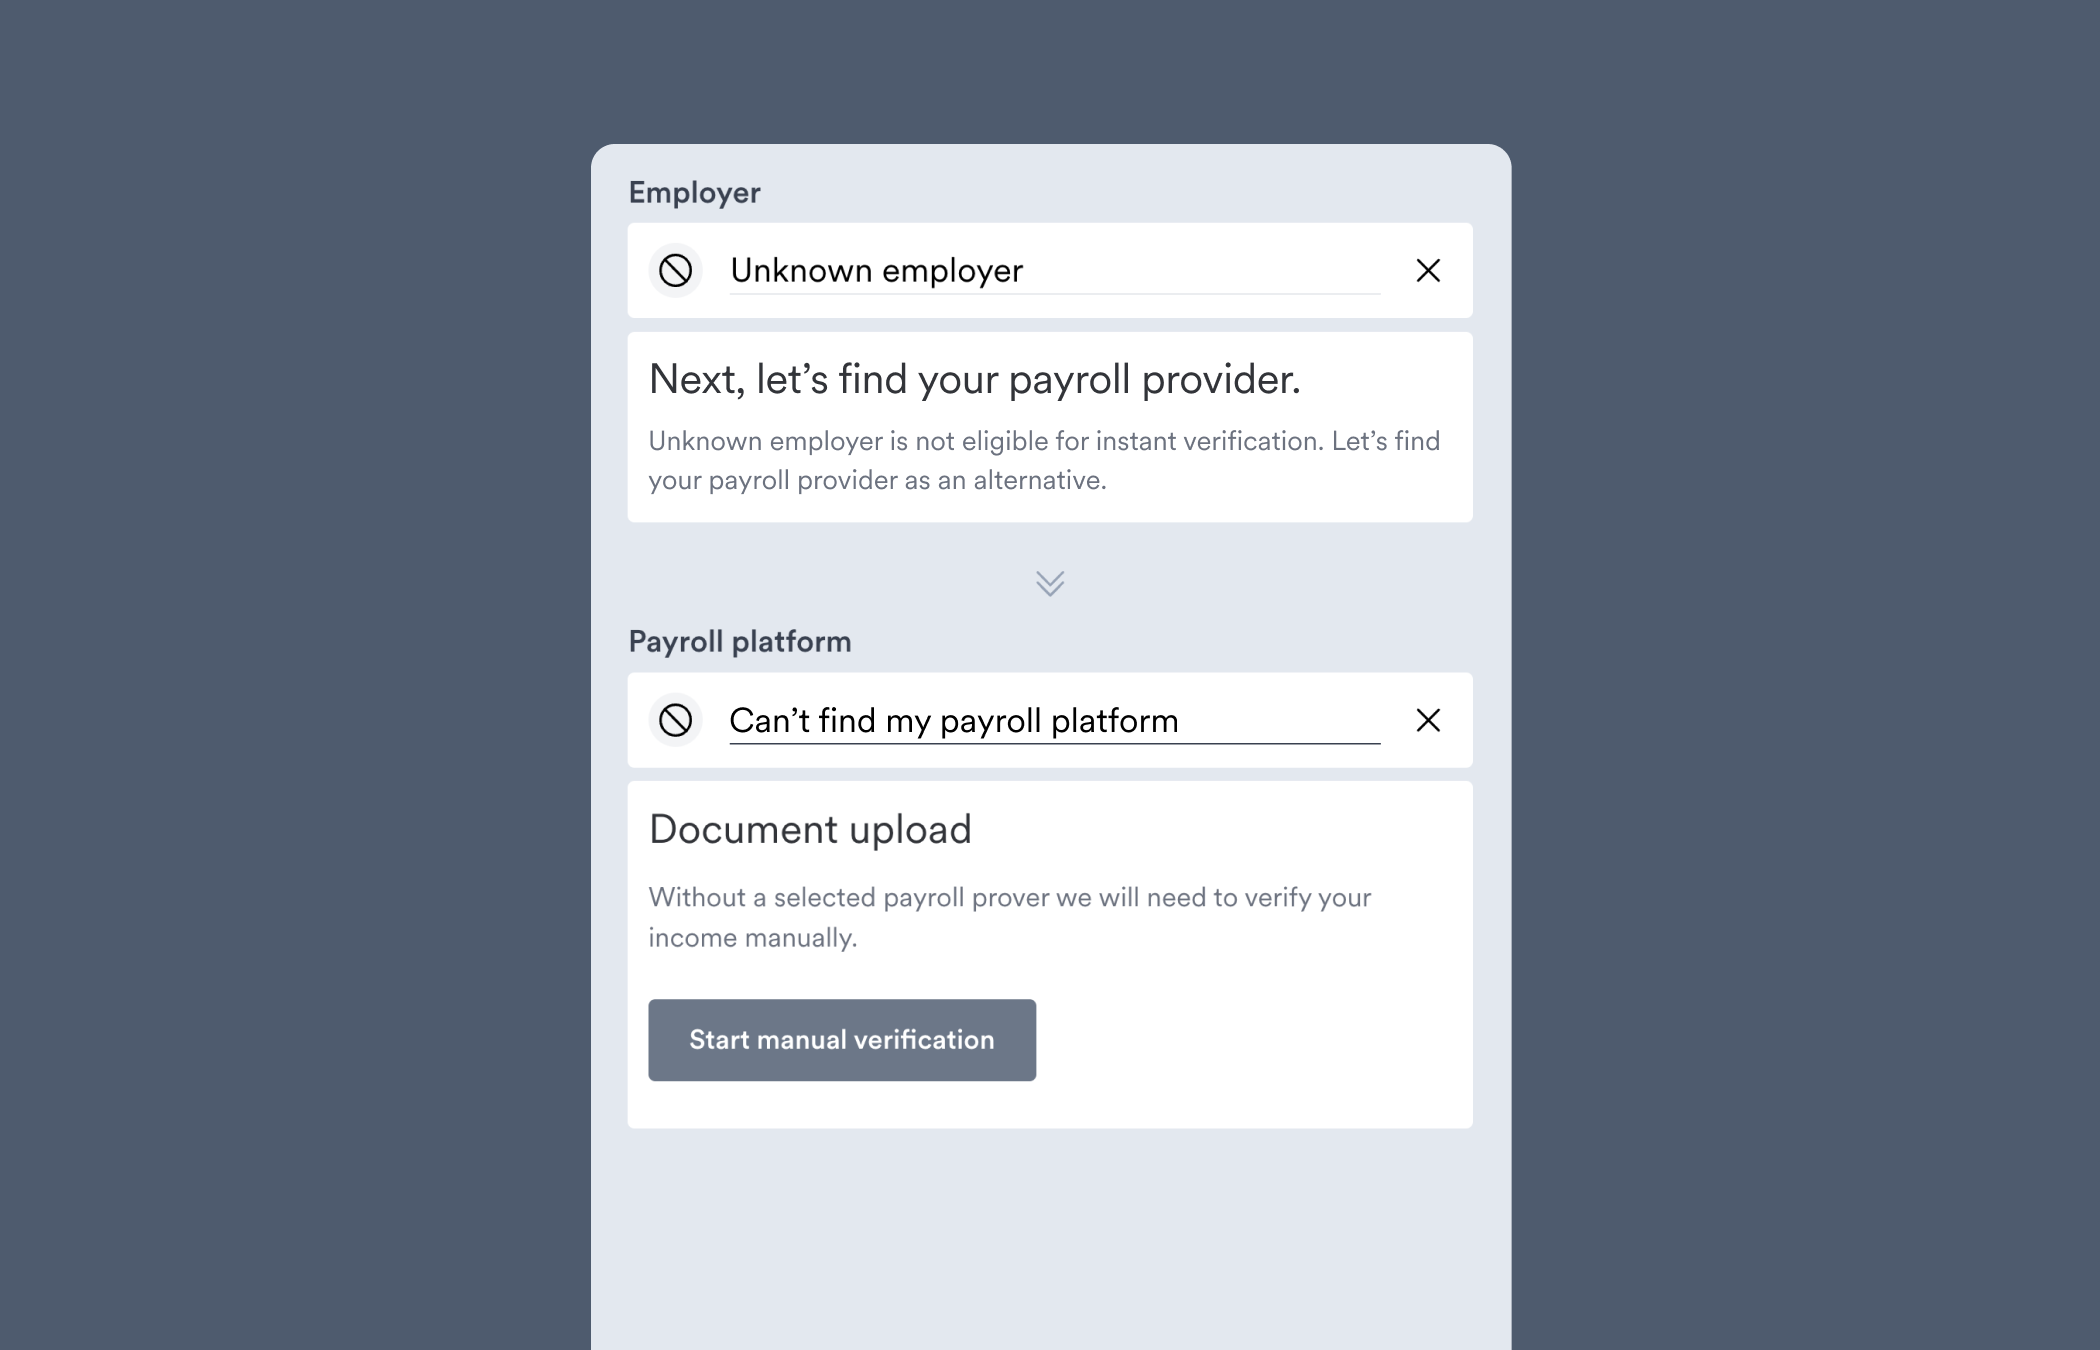 If the user cannot find their employer or payroll provider, a fallback flow such as uploading documents as shown in this image is possible in Link.